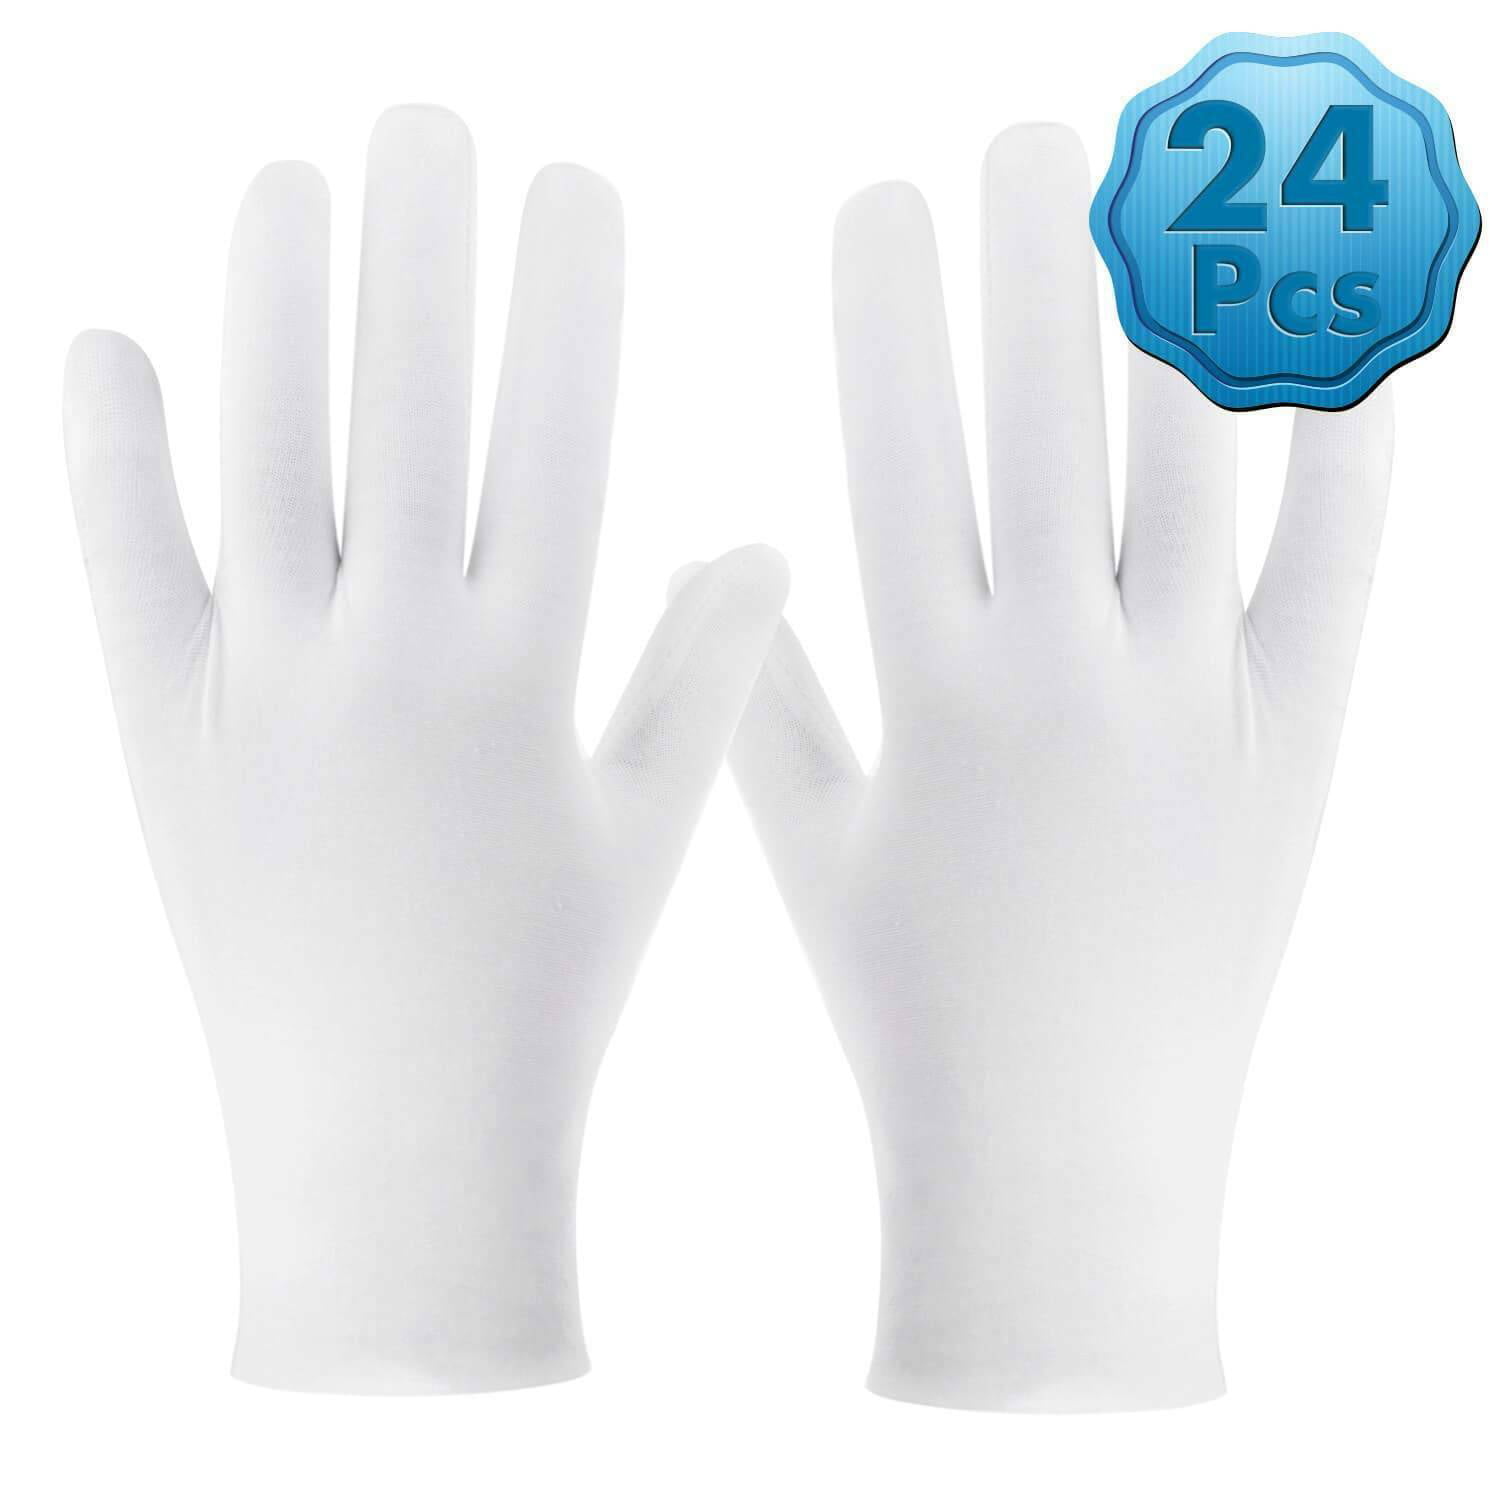 24 PAIR WHITE COTTON LISLE COIN JEWELRY INSPECTION GLOVES PHOTO FILM GOLD MEN LG 